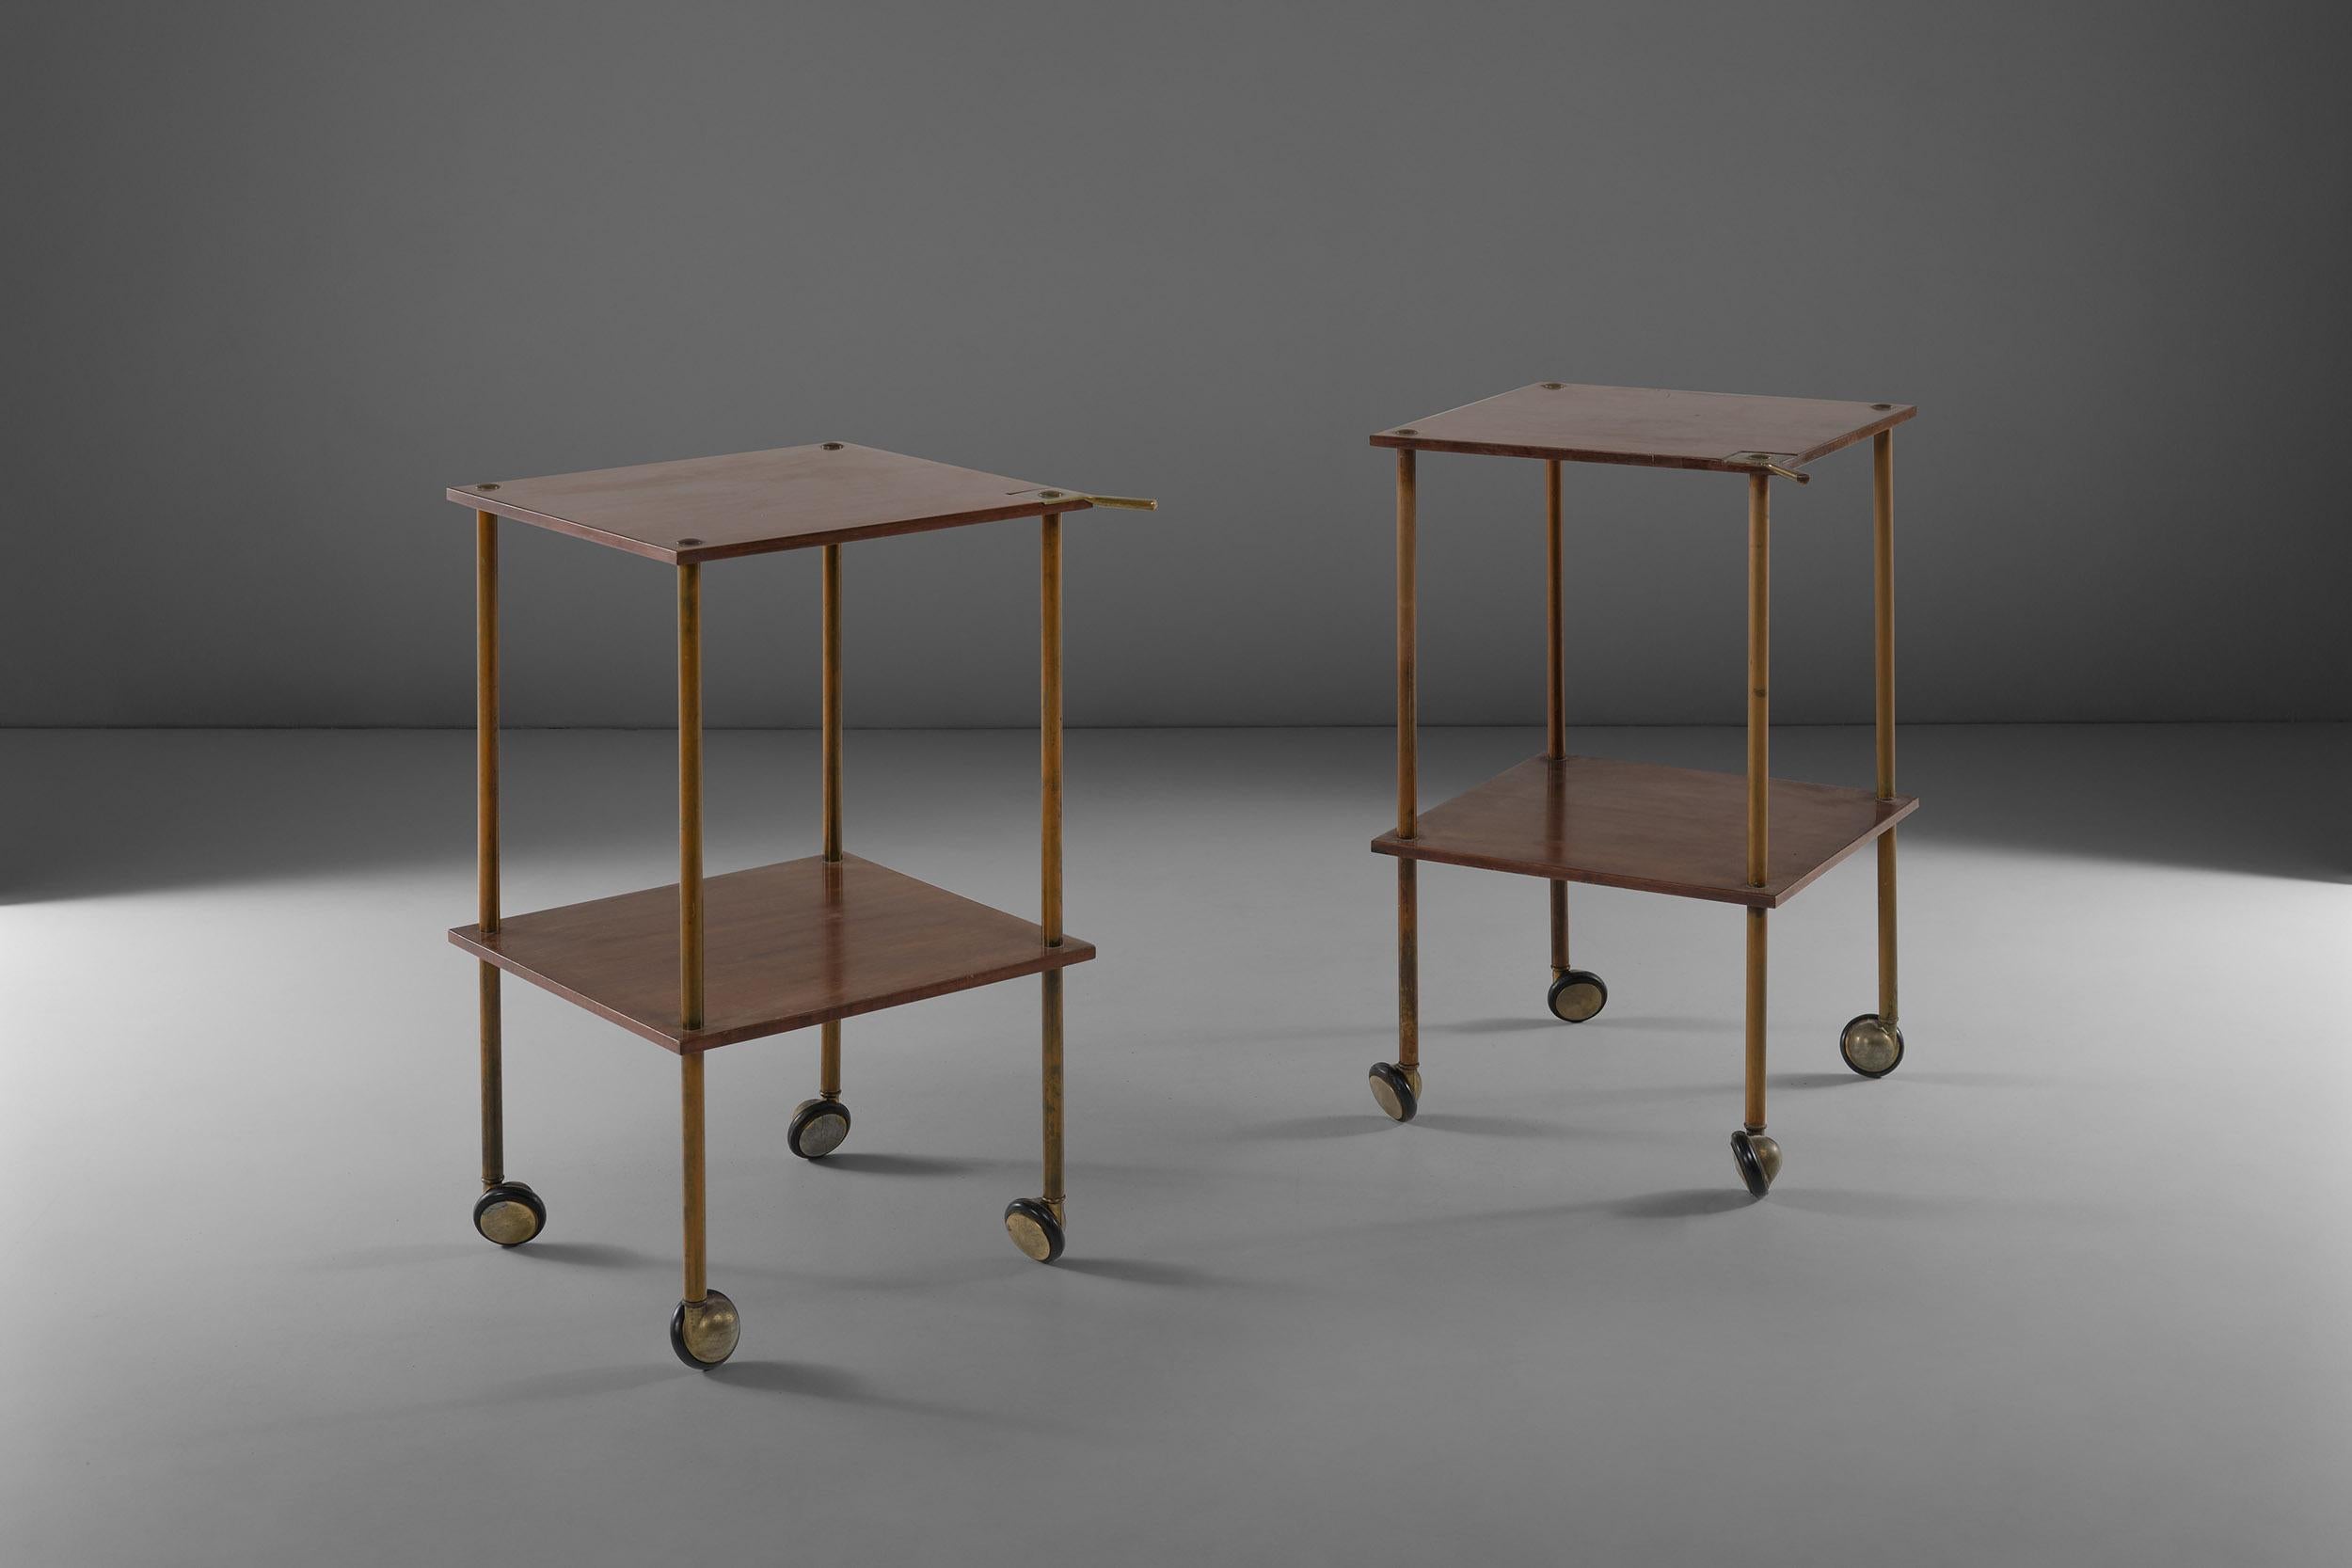 The T9 side table was designed by Luigi Caccia Dominioni for Azucena originally in 1955.
The perfect match of the wooden double shelves with the brass structure make this rare pair of side tables a true must-have. The wheels add a touch of